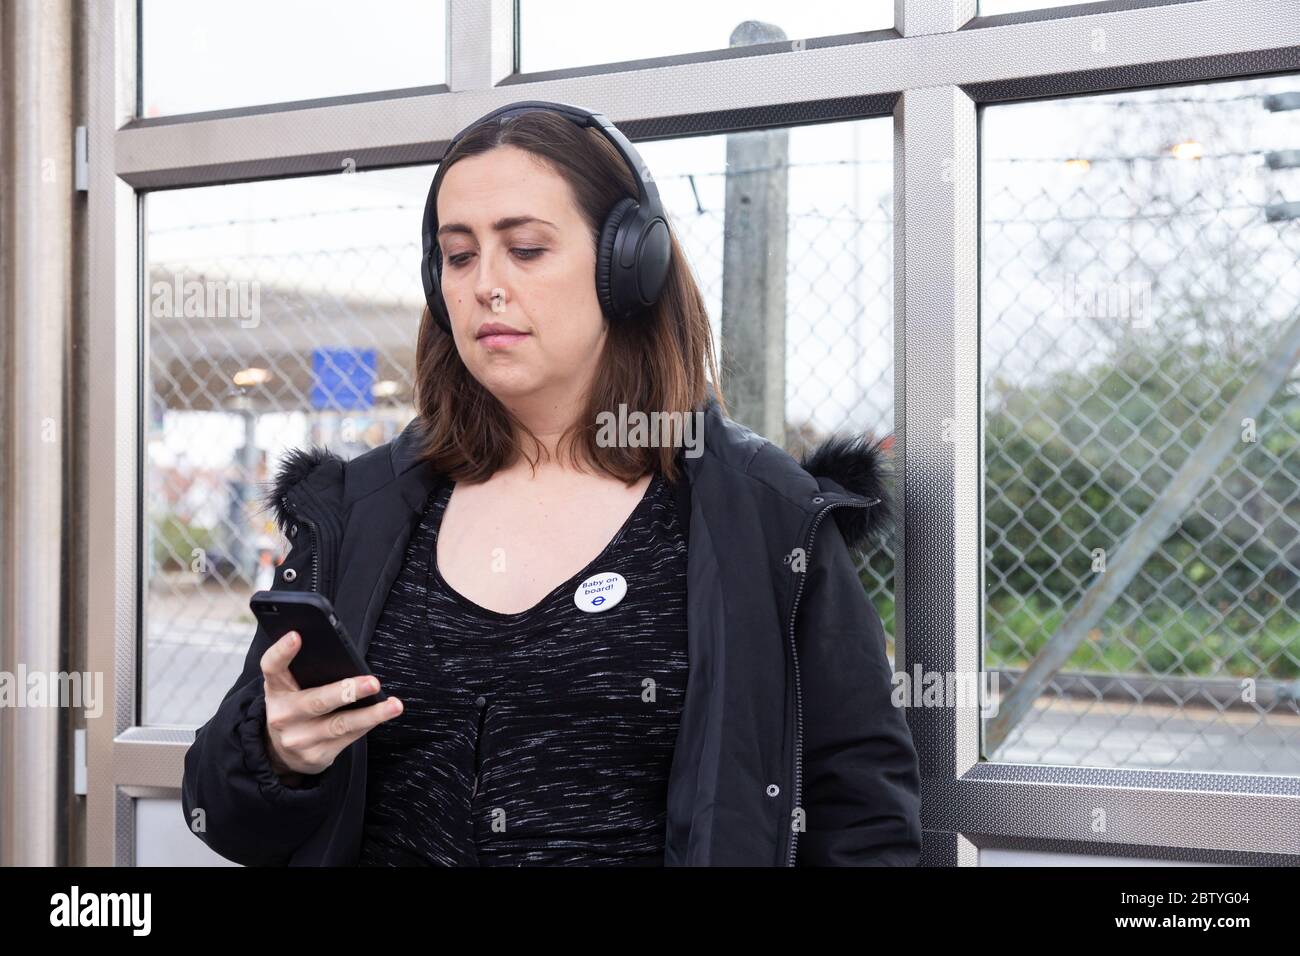 Pregnant passenger waits for her train in a station shelter at New Cross Gate Stock Photo